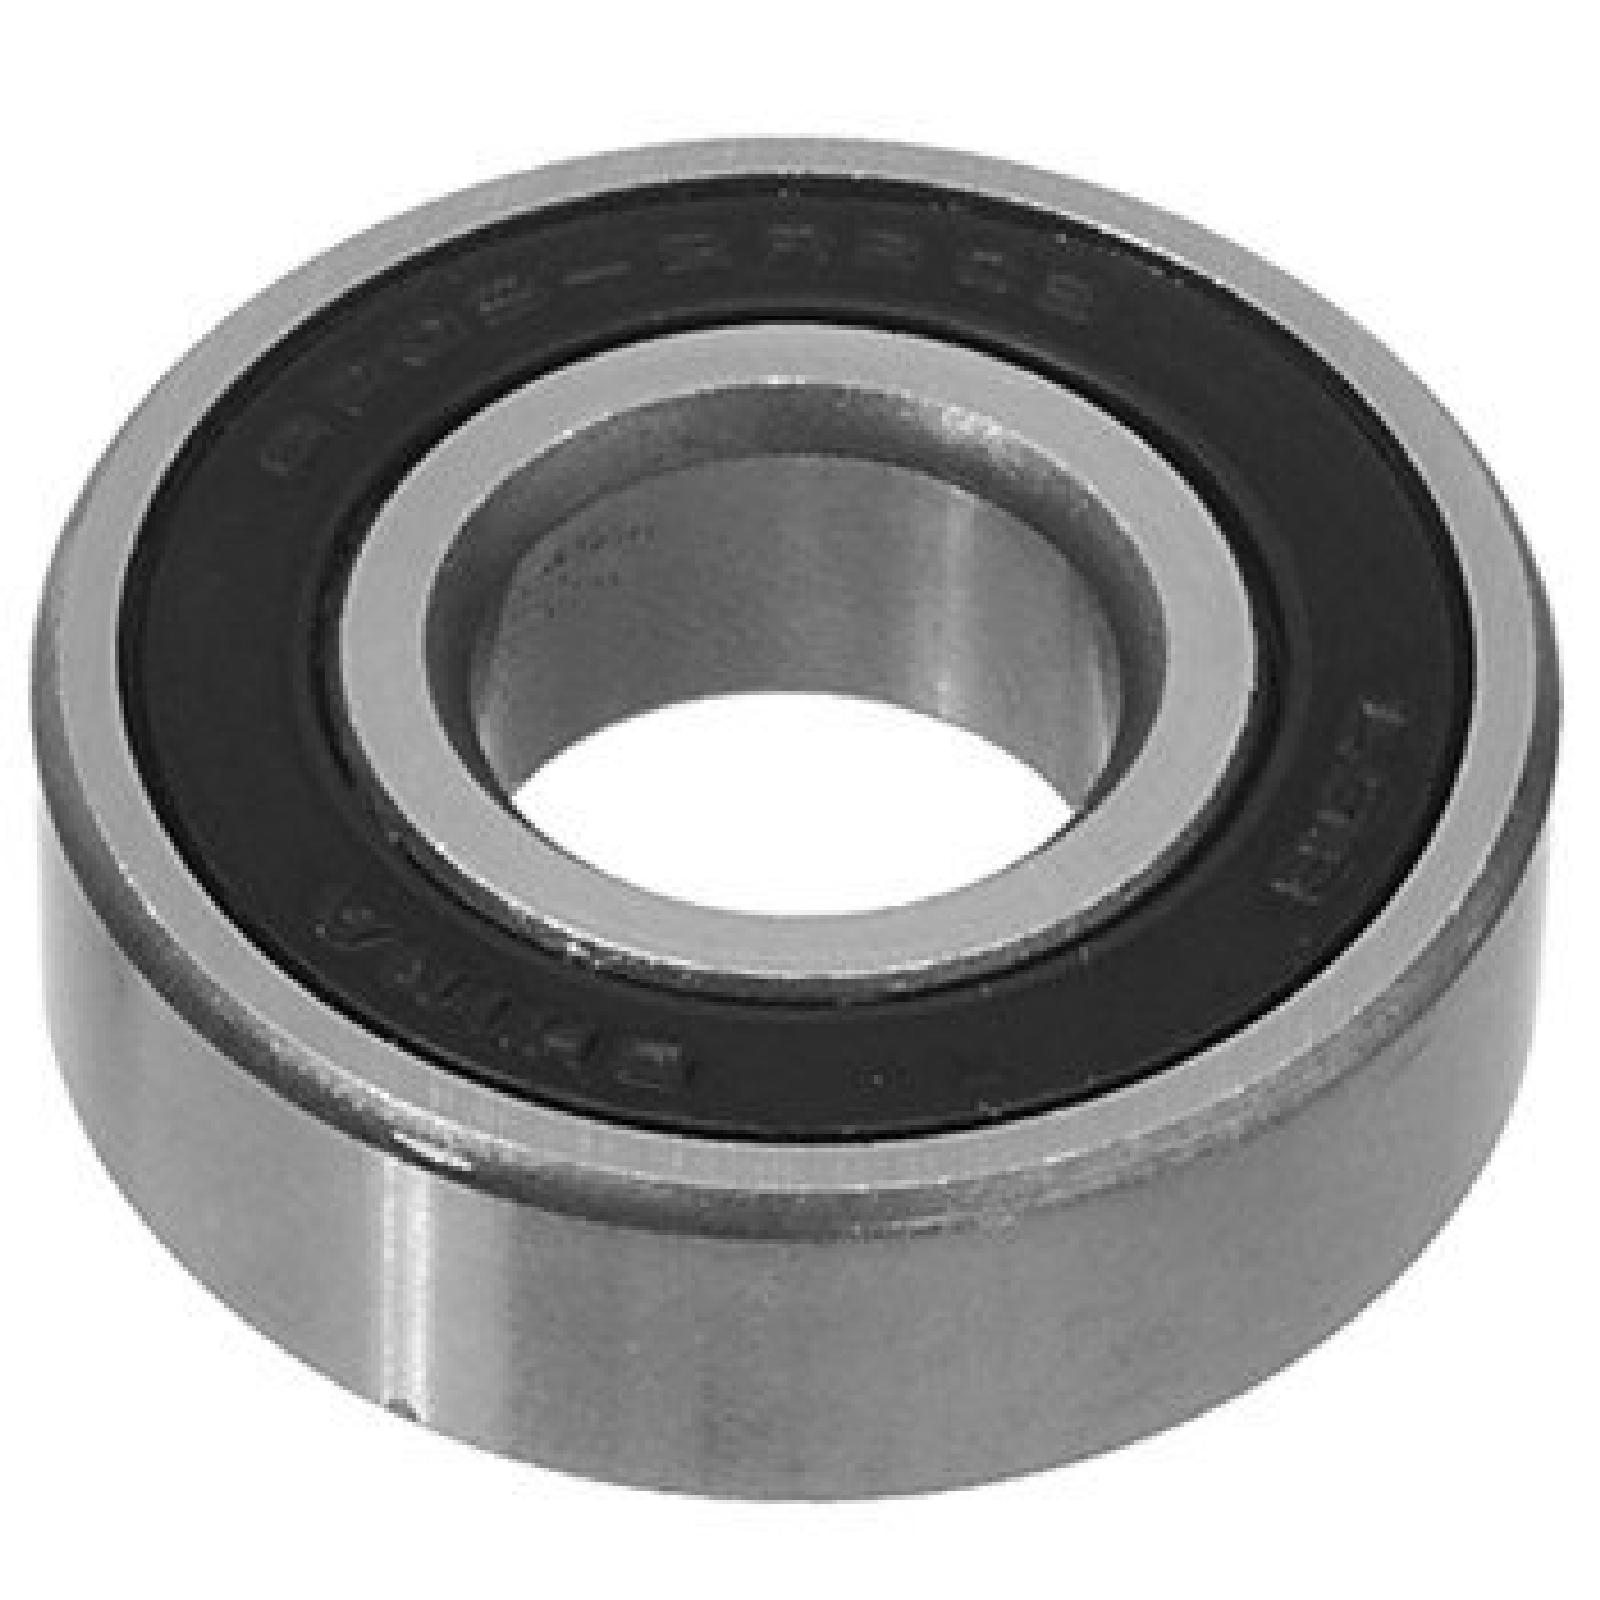 BEARING, BALL MAGNUM 6204 part# 45259 by Oregon